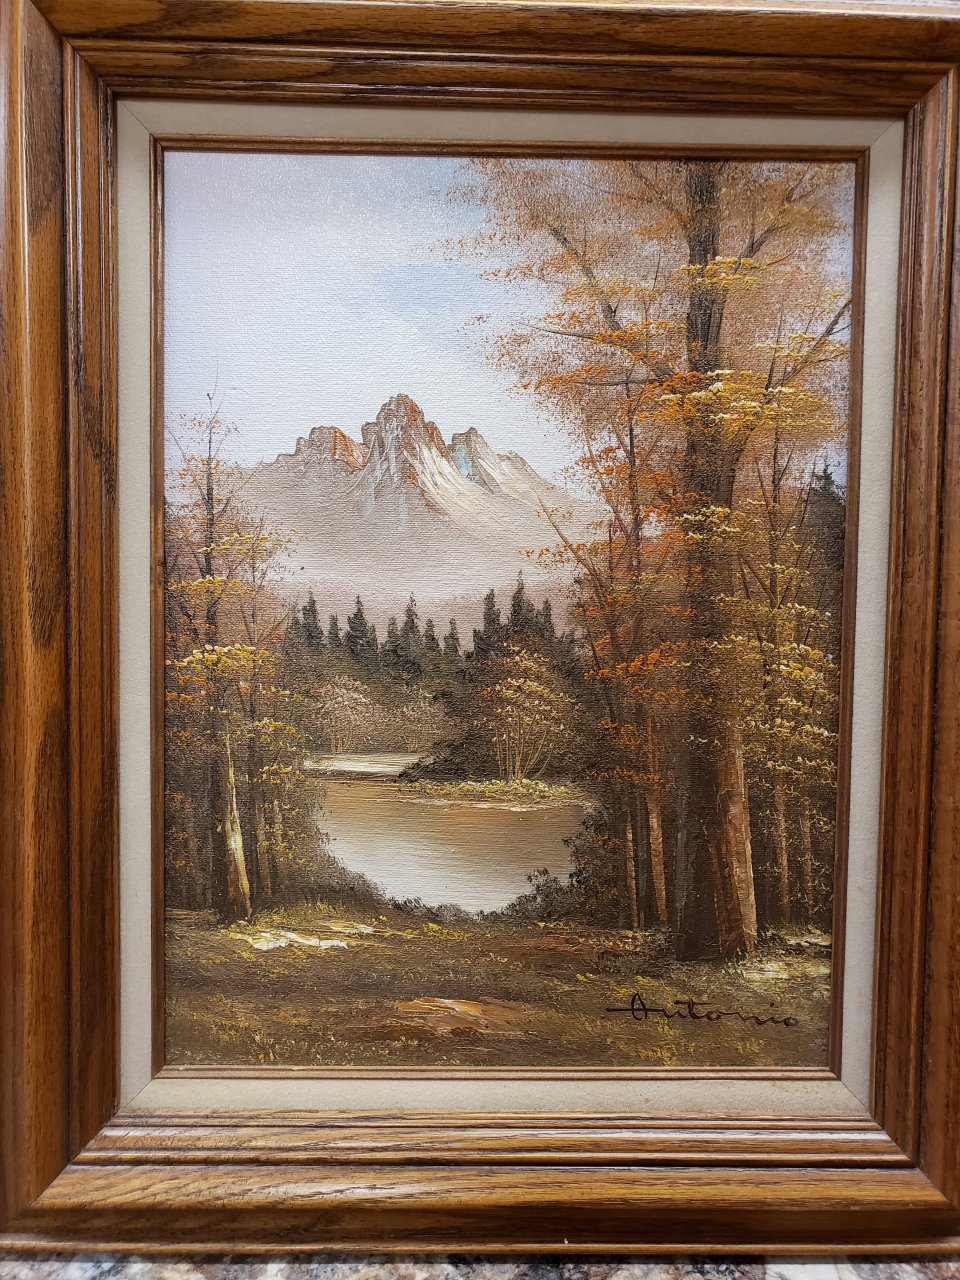 Oil On Canvas Painting Signed By "Antonio" | Artifact Collectors